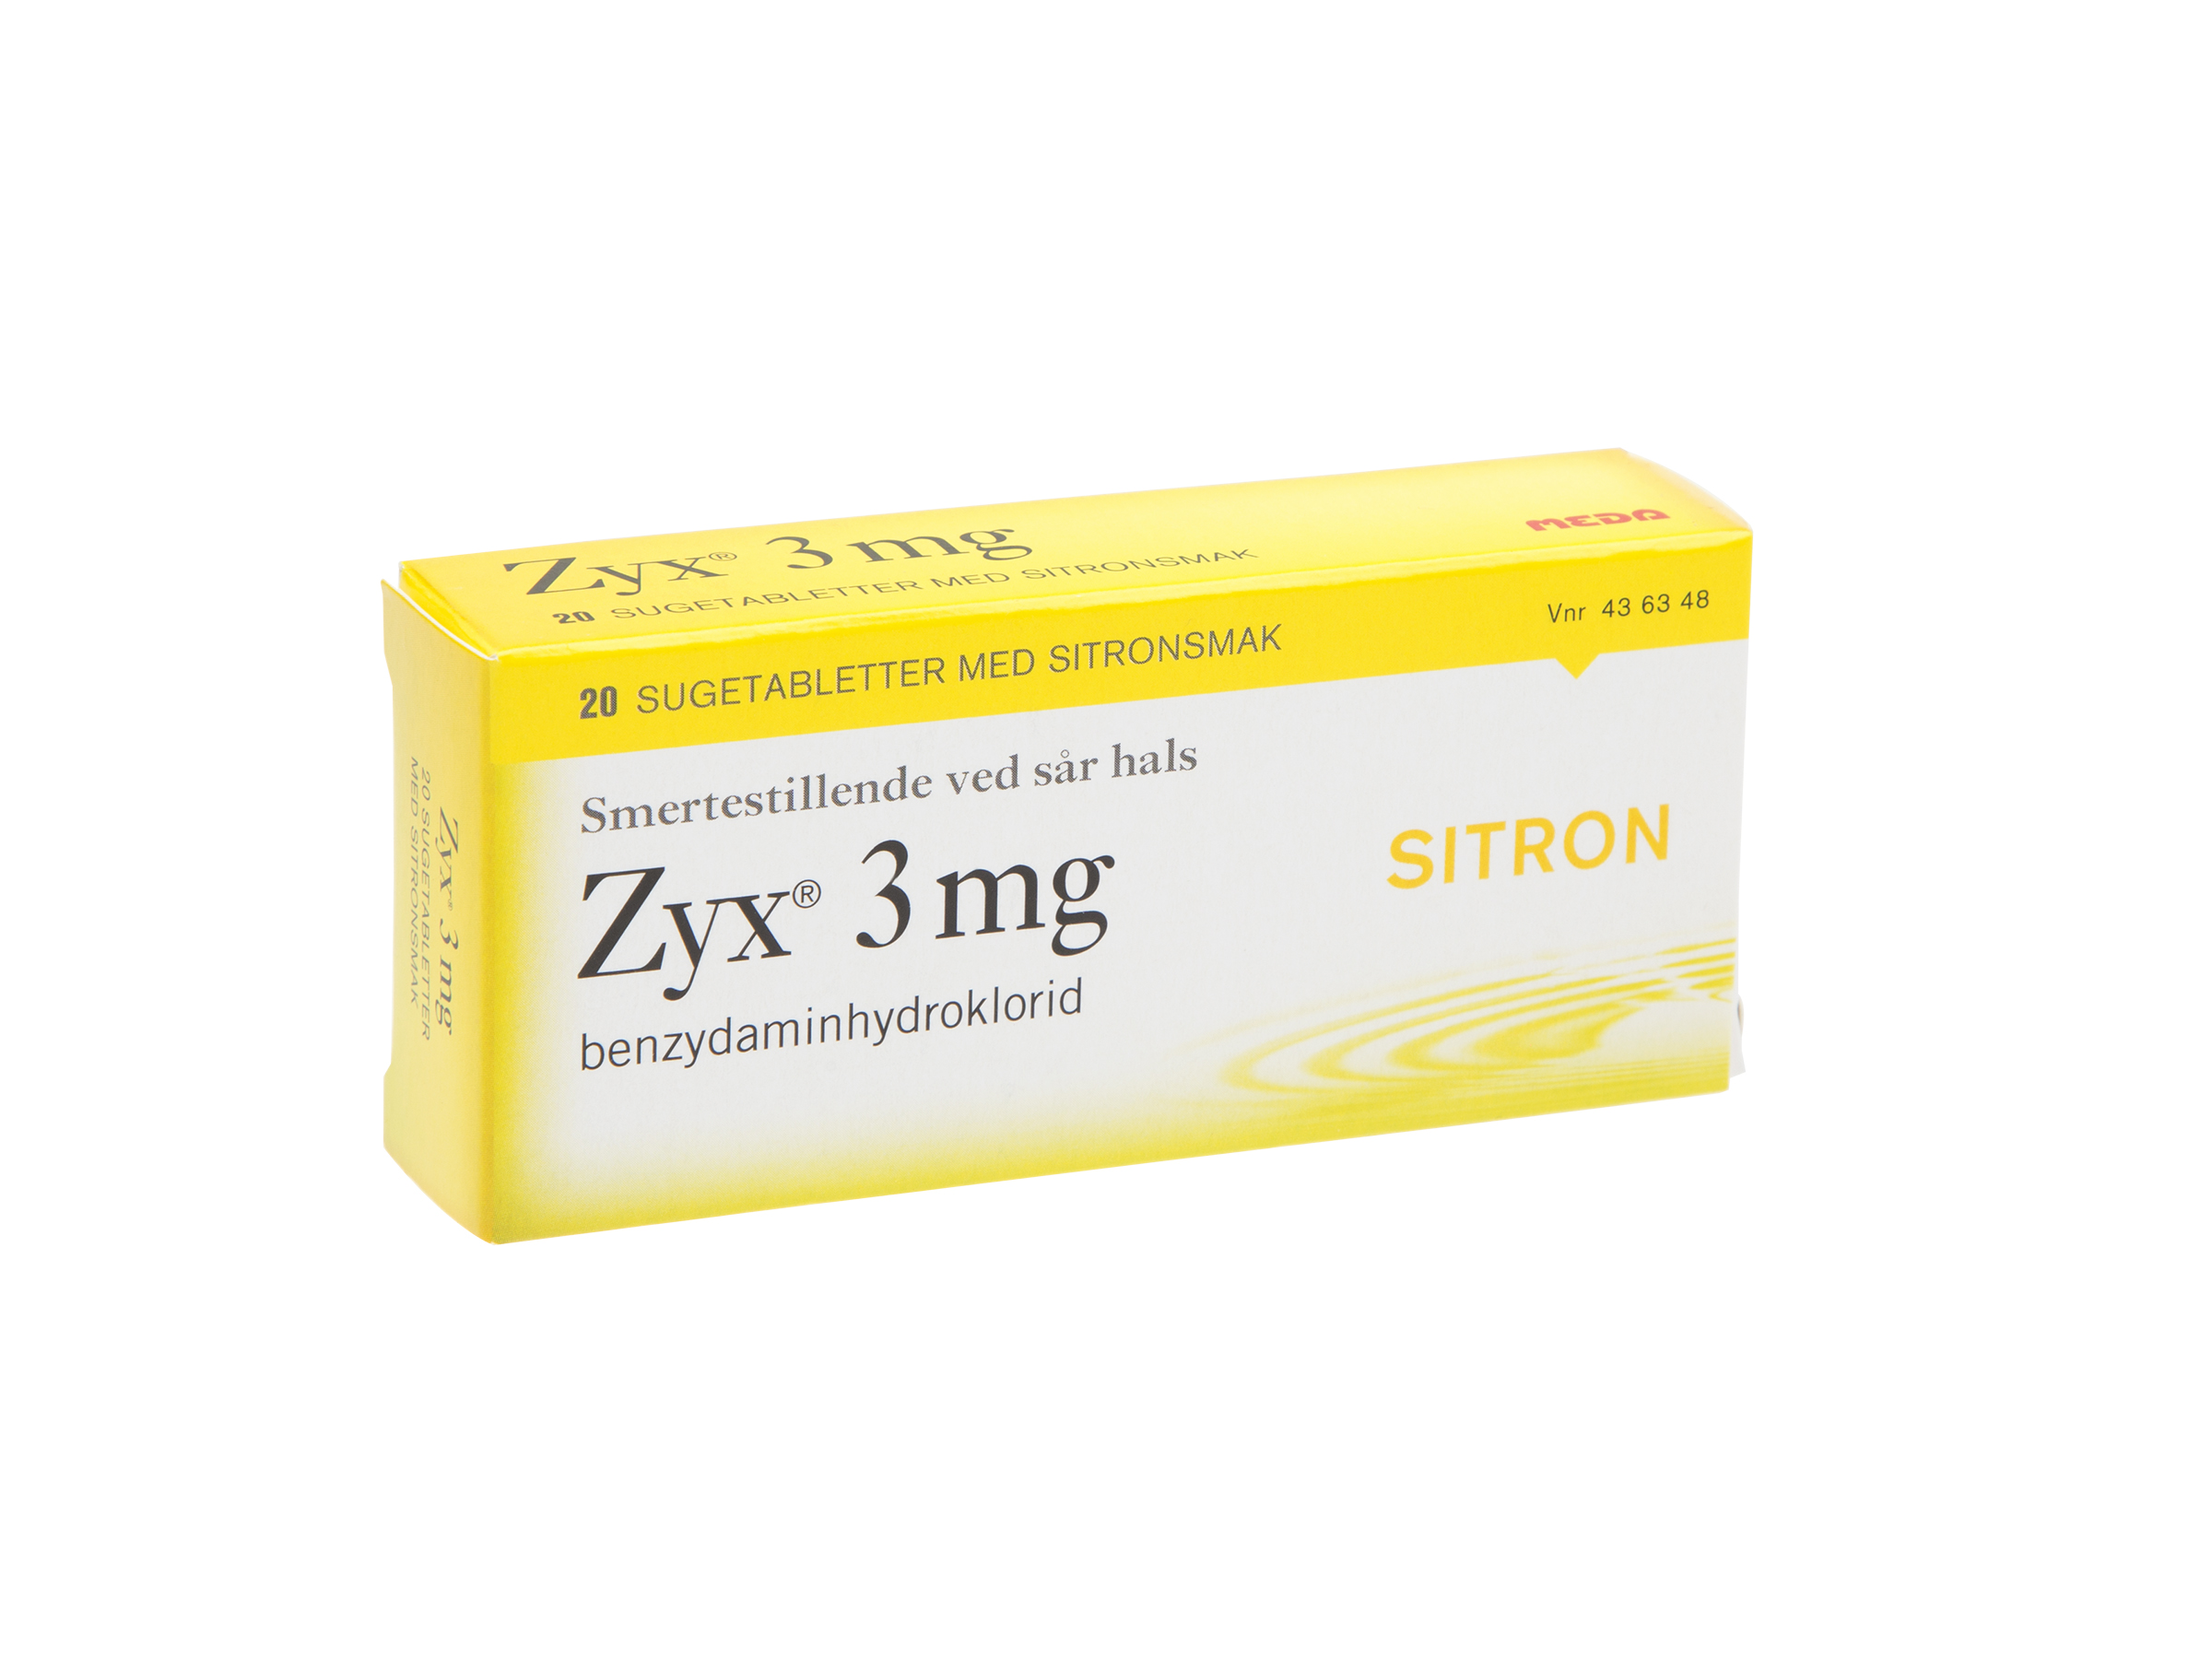 Zyx 3 mg sitron sugetabletter, 20 stk.